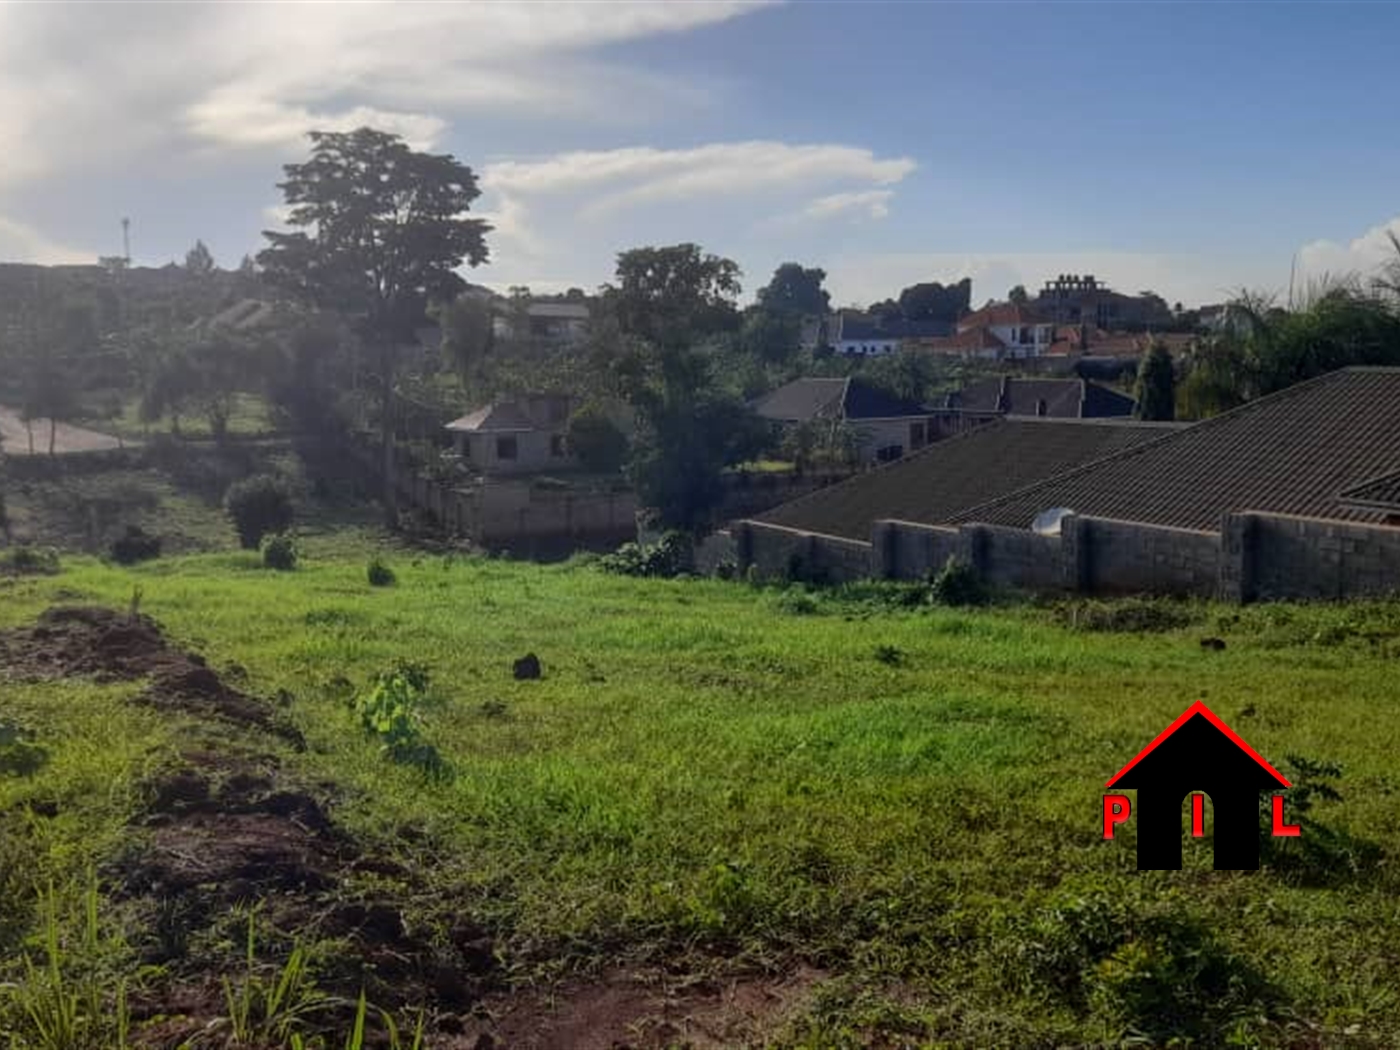 Commercial Land for sale in Kungu Wakiso